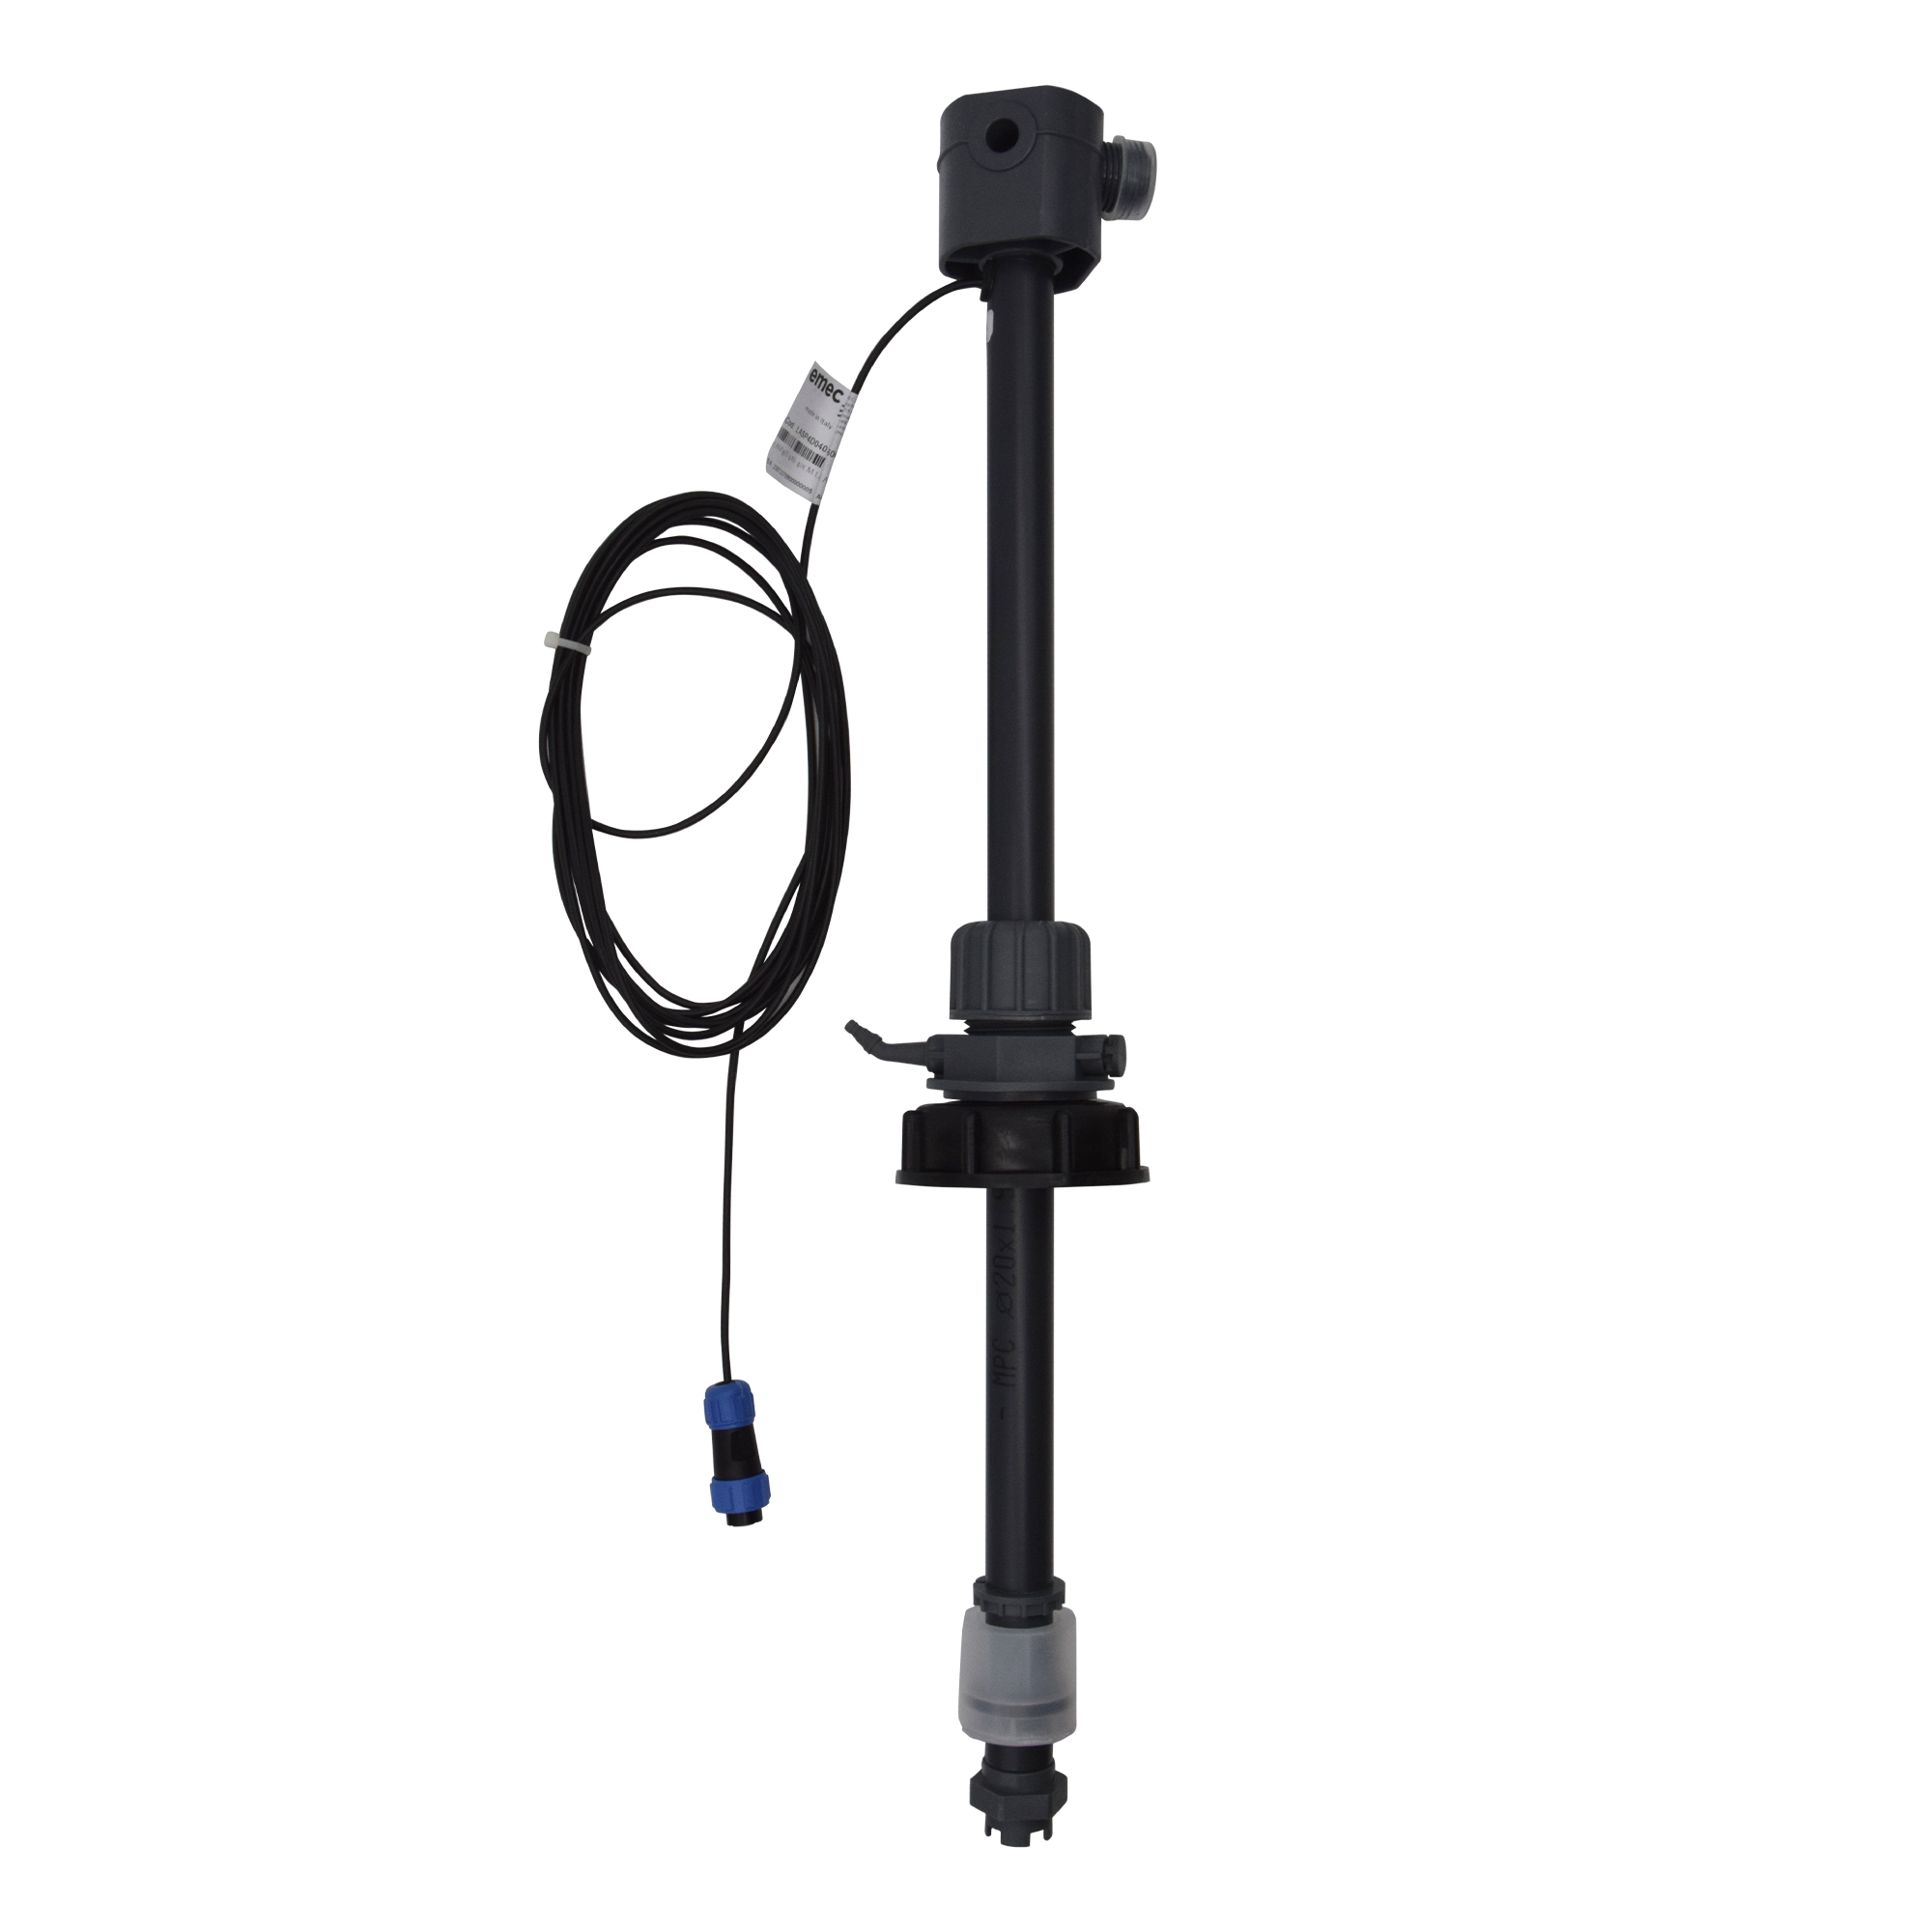 emec EPDM suction lance with 40cm immersion length (LASP4) - BNC plug for connection to K and VMS pumps